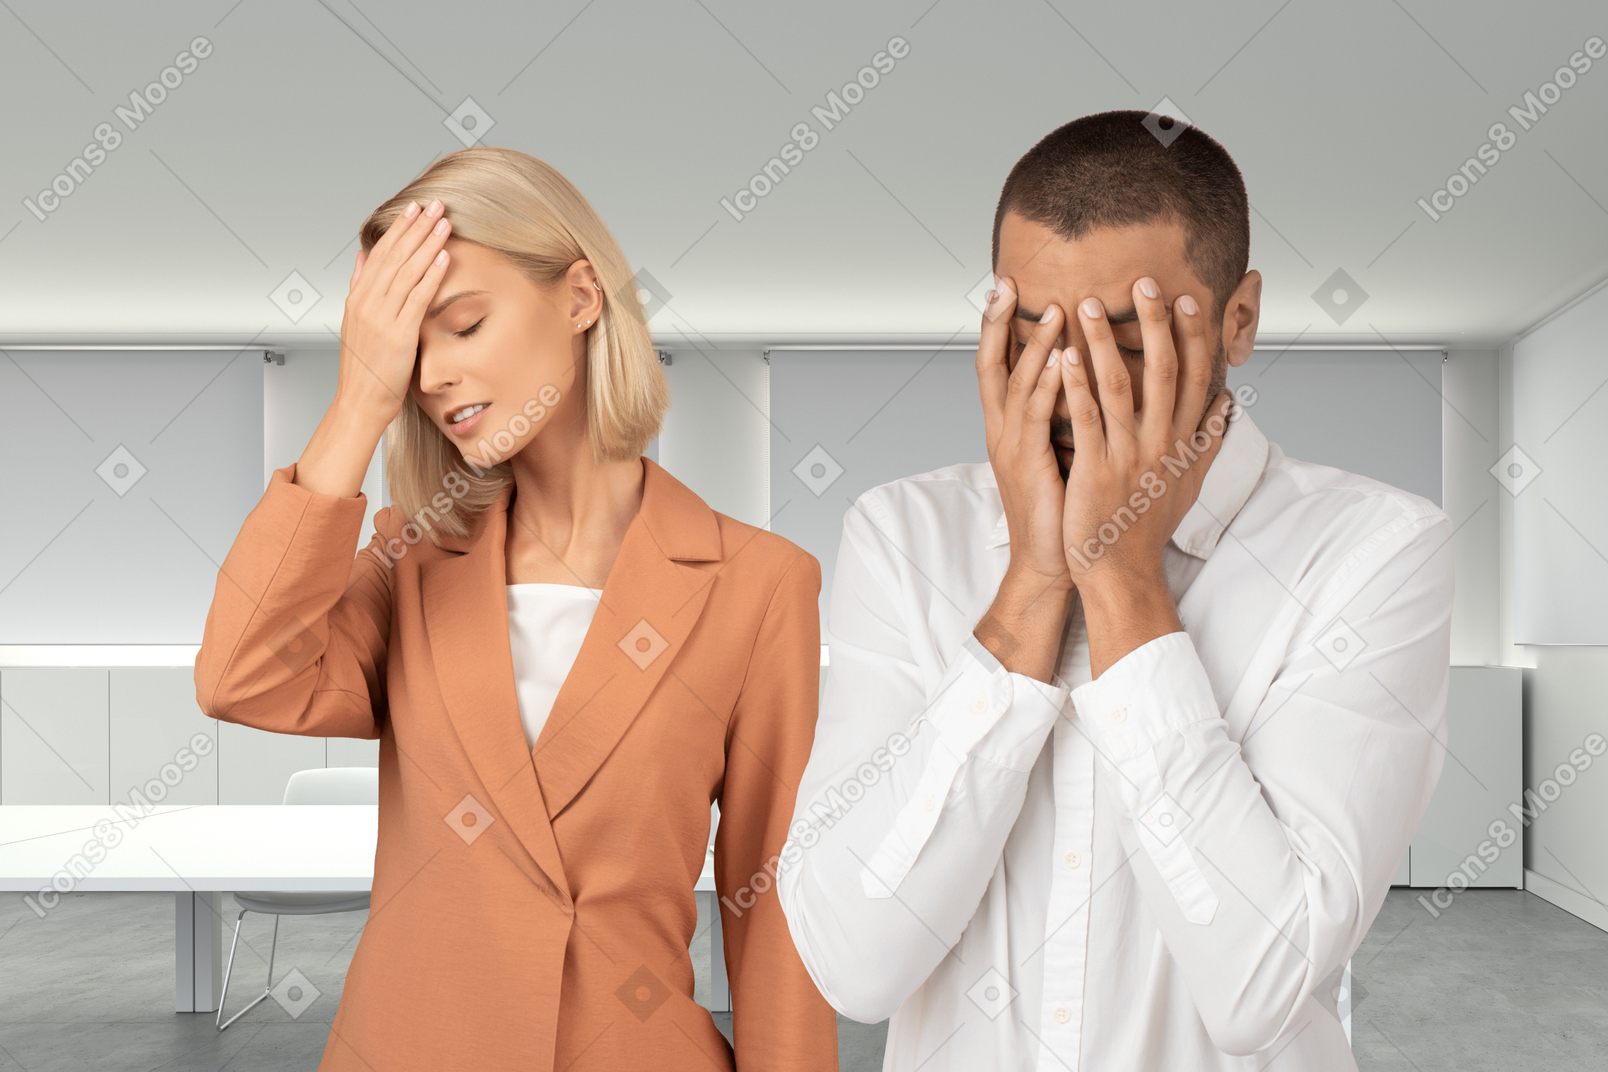 Blonde woman in peach jacket with hand on her forehead and an afro man with hands closing his face are standing together in the meeting room